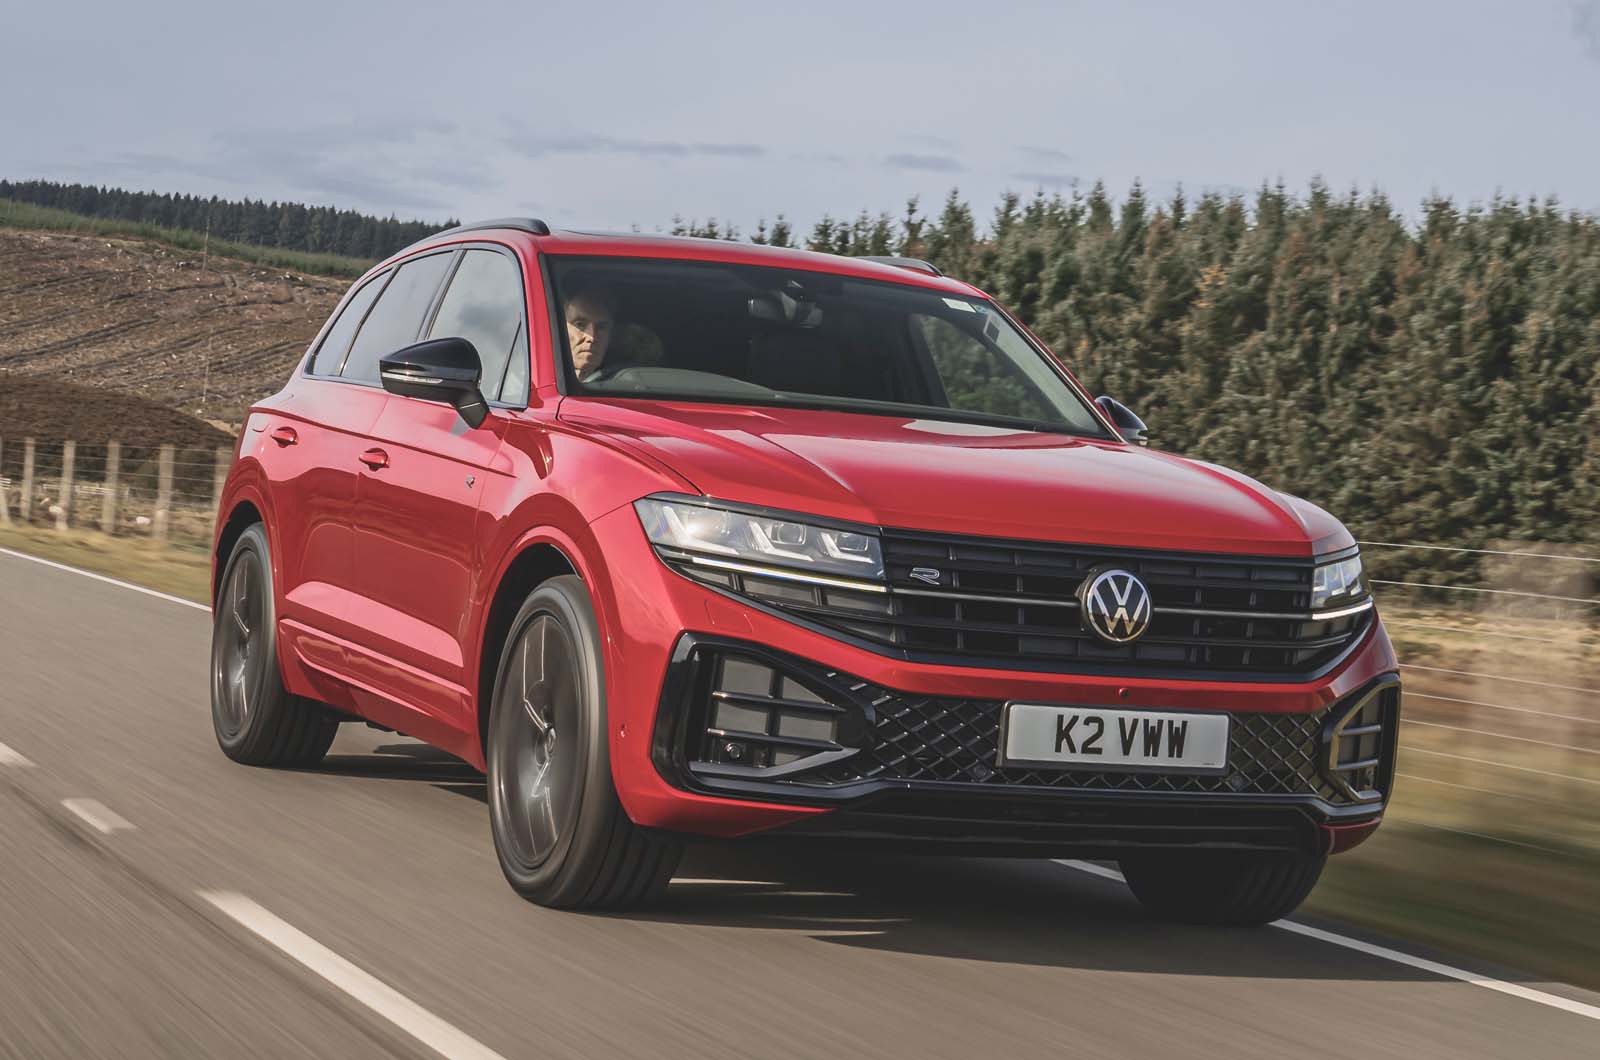 The Volkswagen Thing: A European Answer To The Jeep